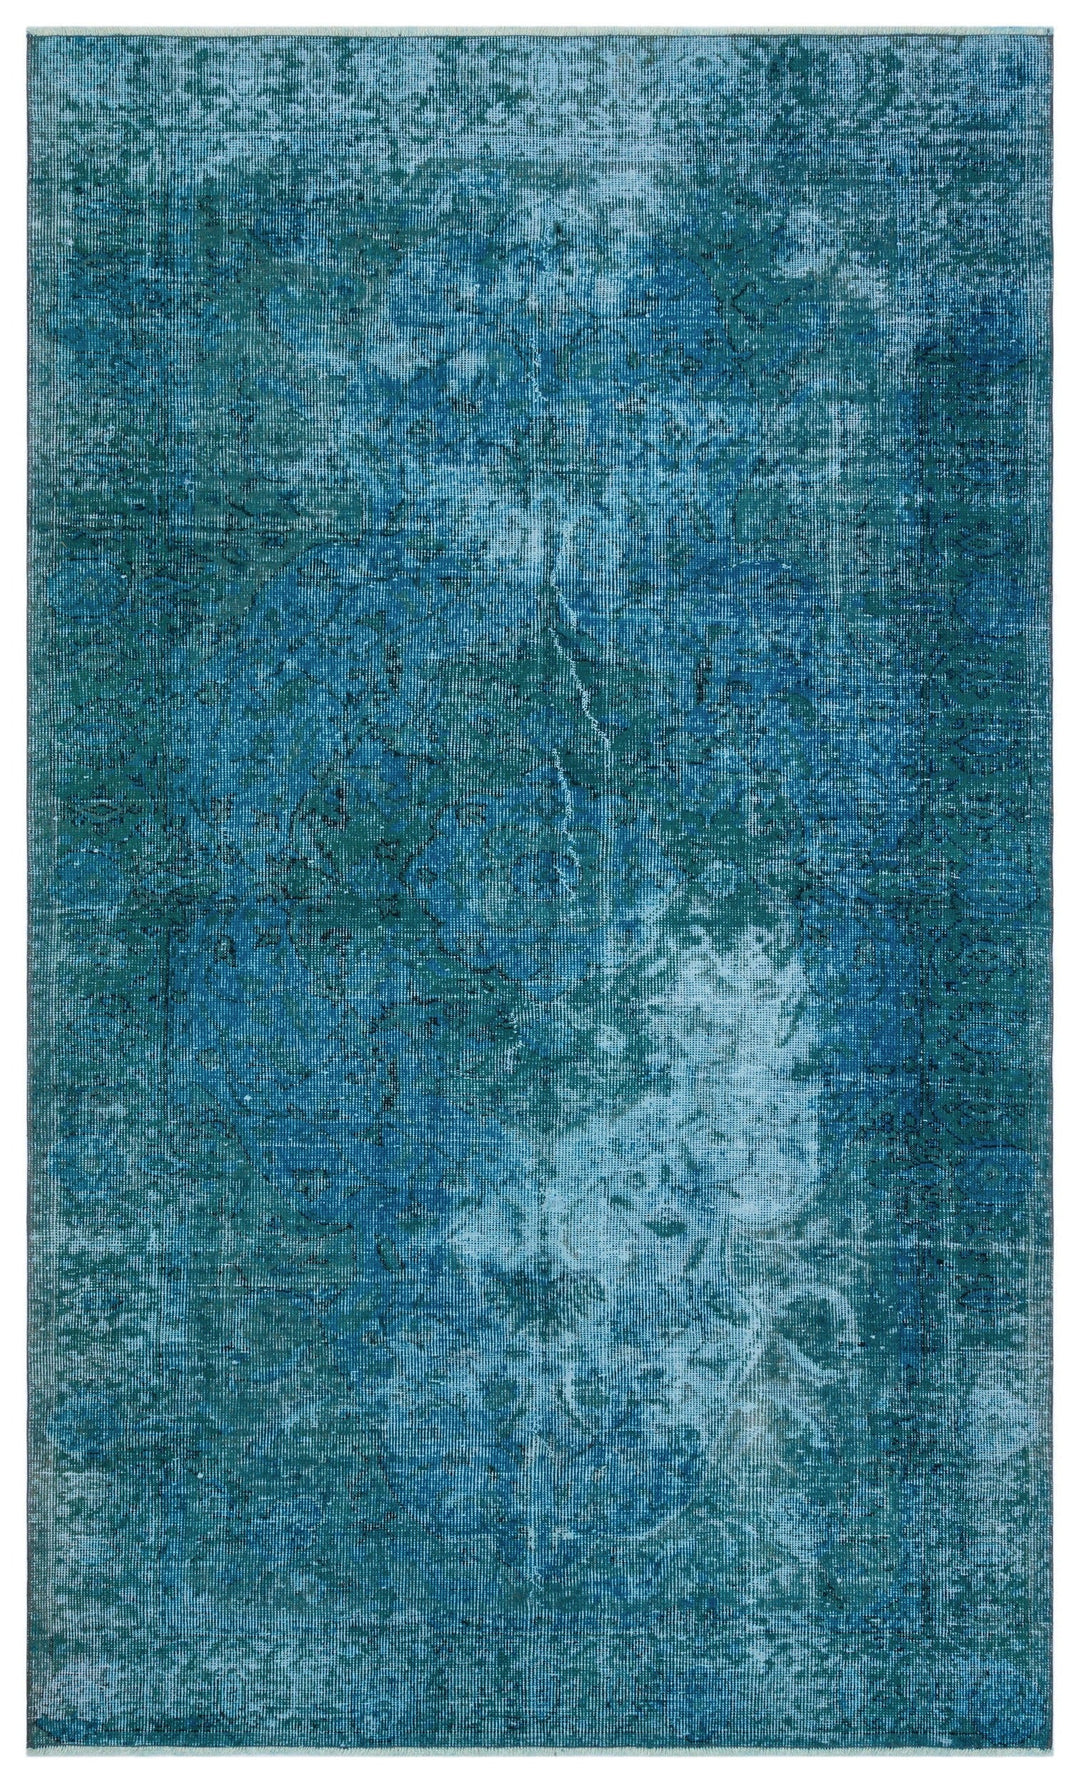 Athens Turquoise Tumbled Wool Hand Woven Carpet 153 x 256